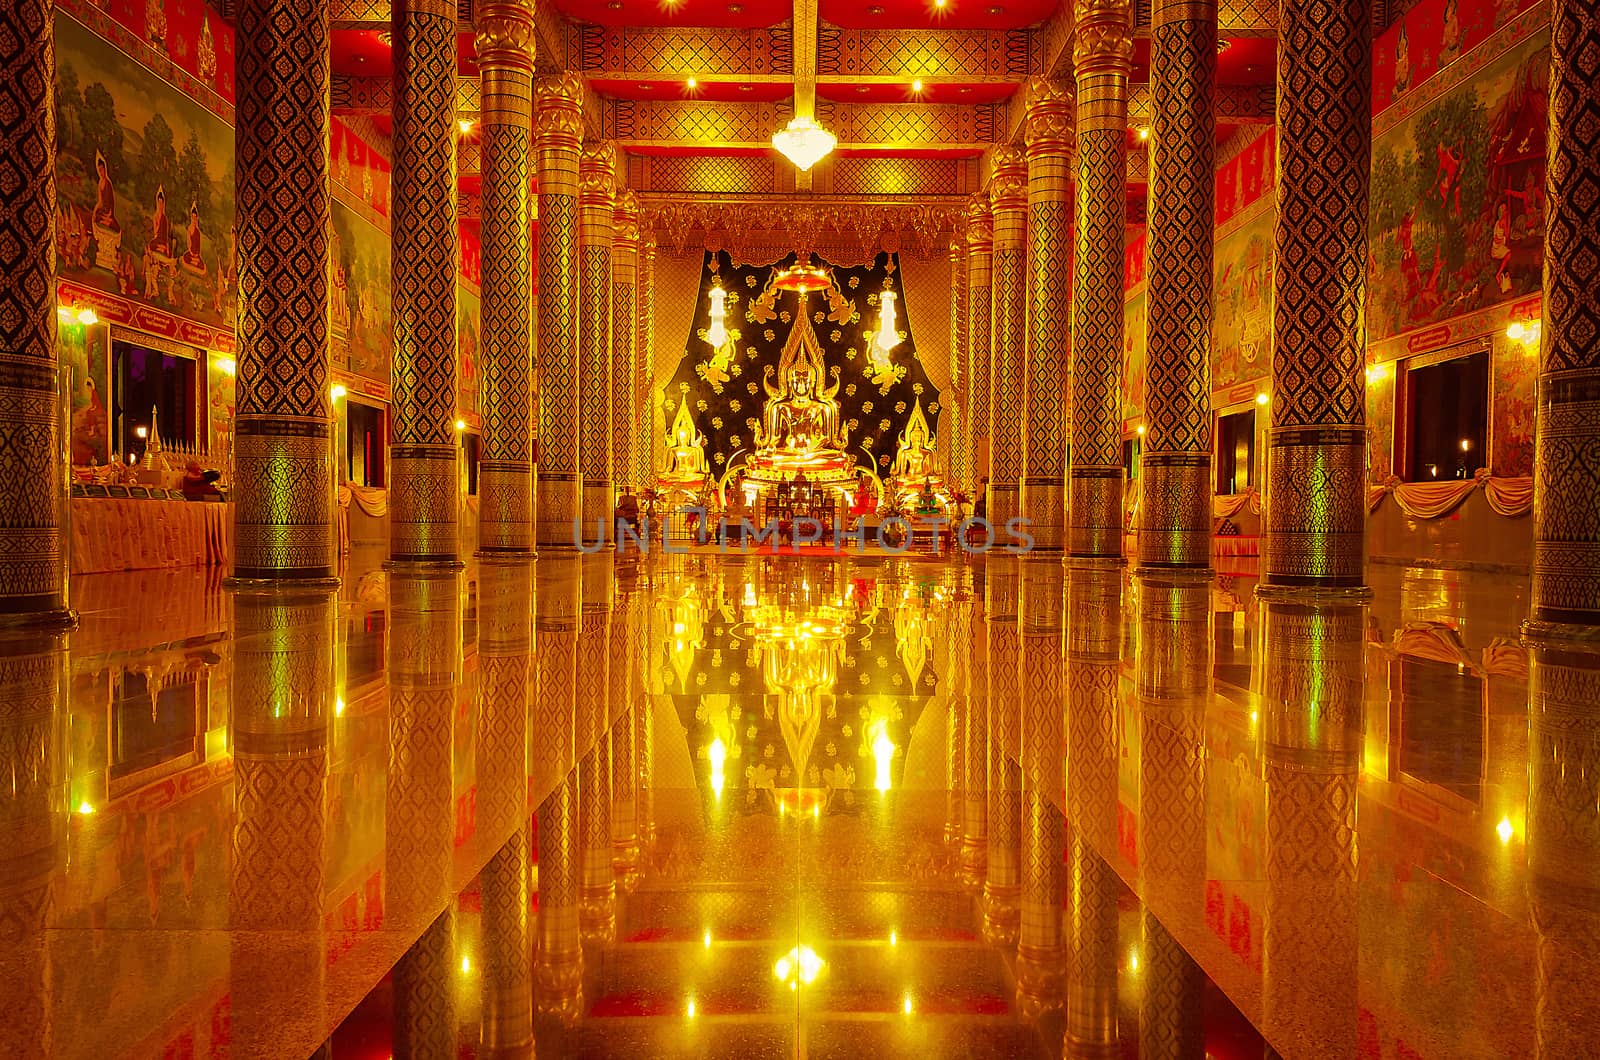 The Golden Seated Buddha Image in Temple.